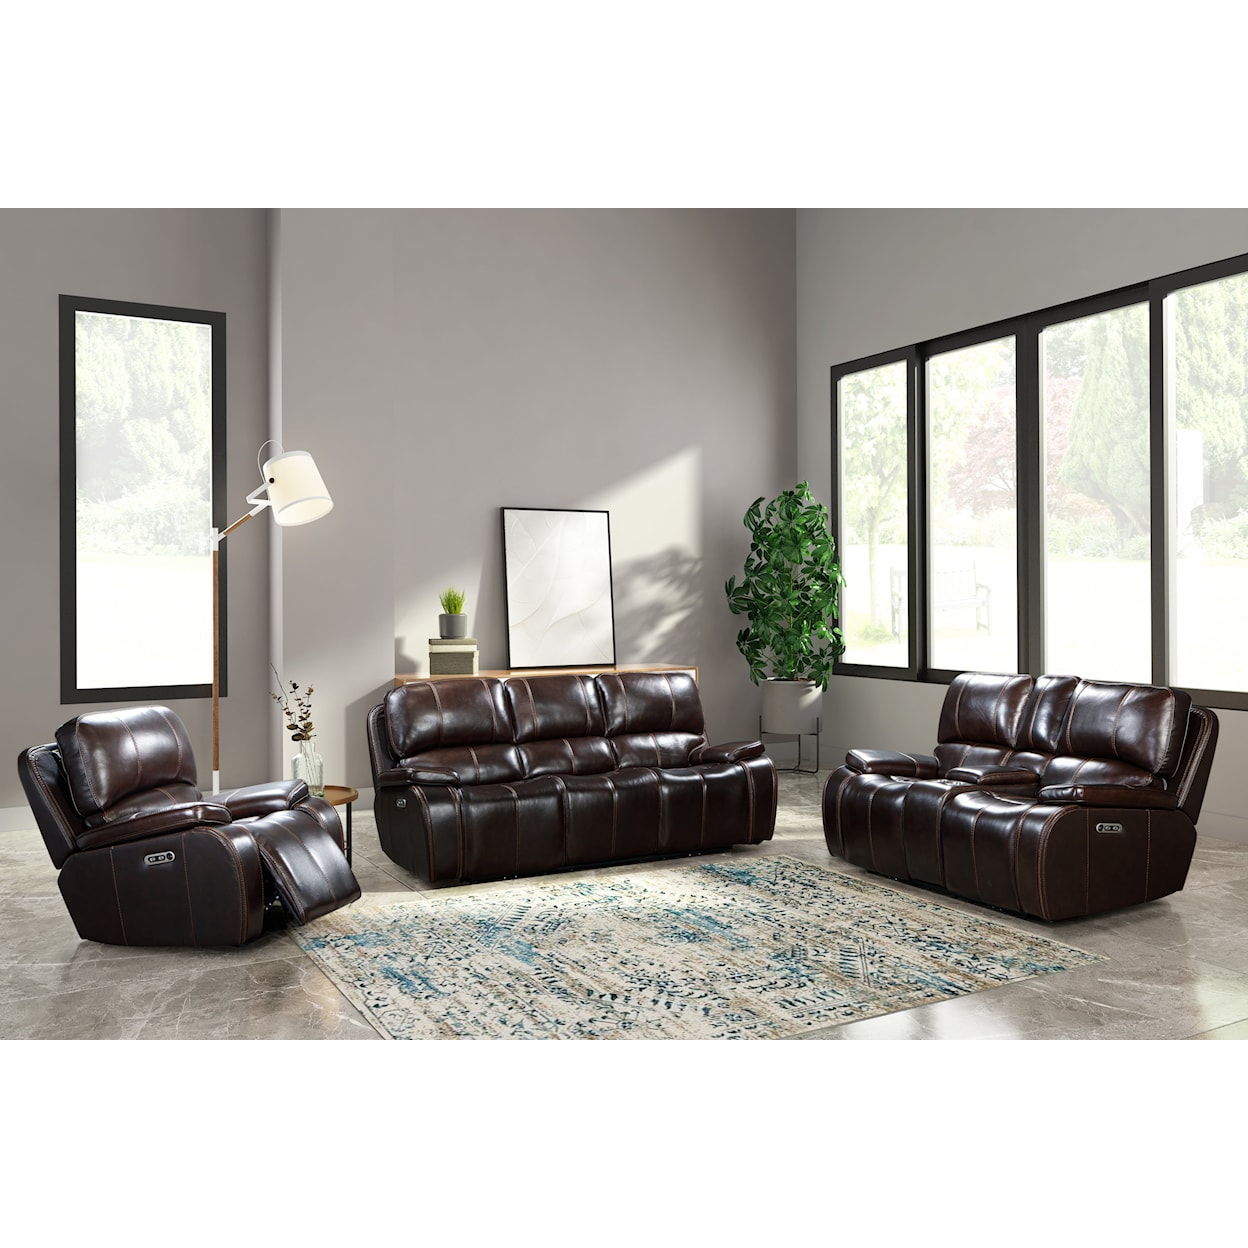 New Classic Brookings Dual Reclining Leather Sofa